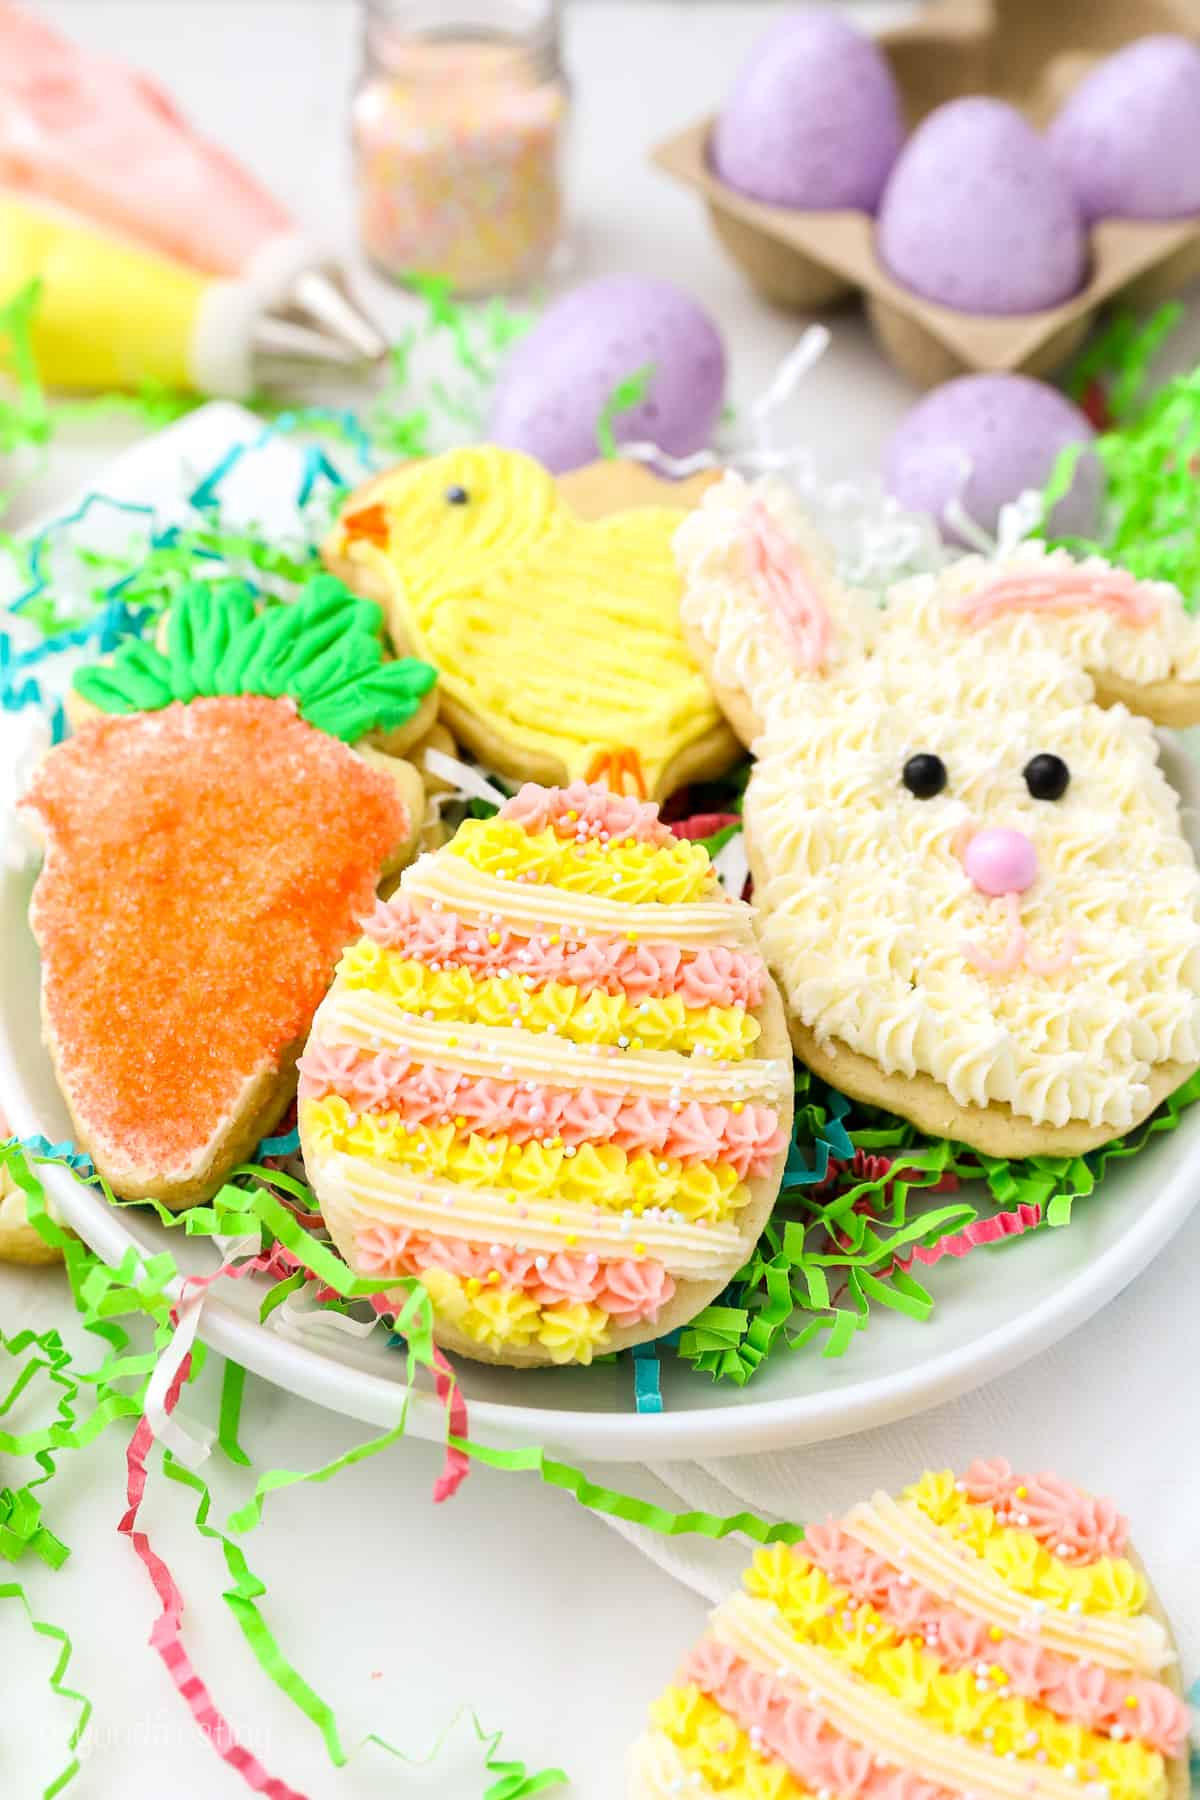 Frosted Easter sugar cookies shaped like a bunny, egg, chick, and carrot on a plate, nestled in green paper grass.